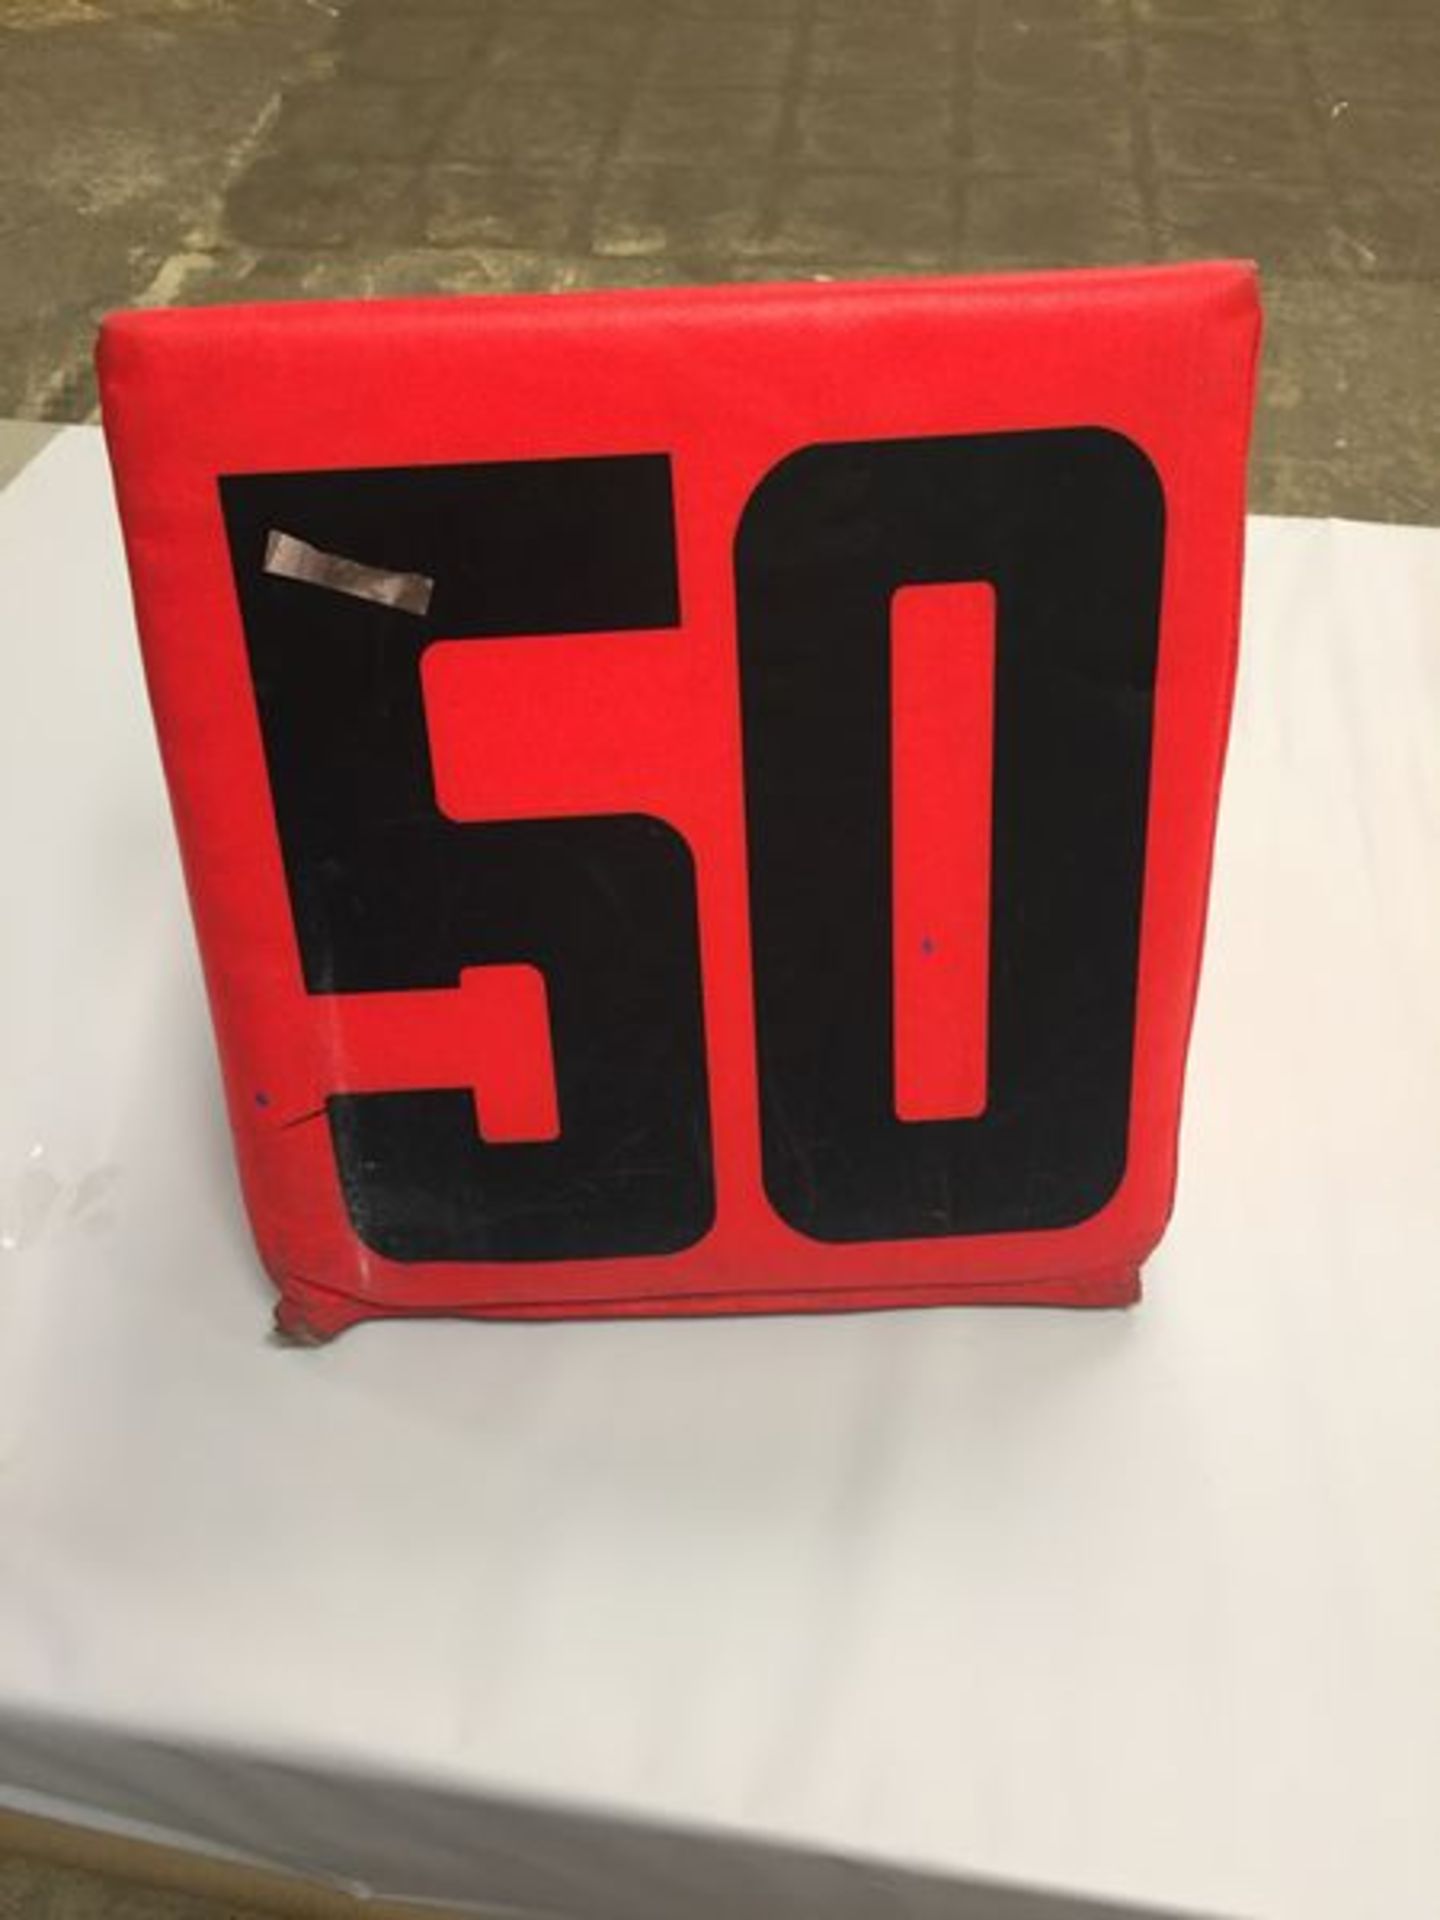 50 yard"" Sideline Marker / Game-Used / This item includes Georgia Dome Authentication Tag